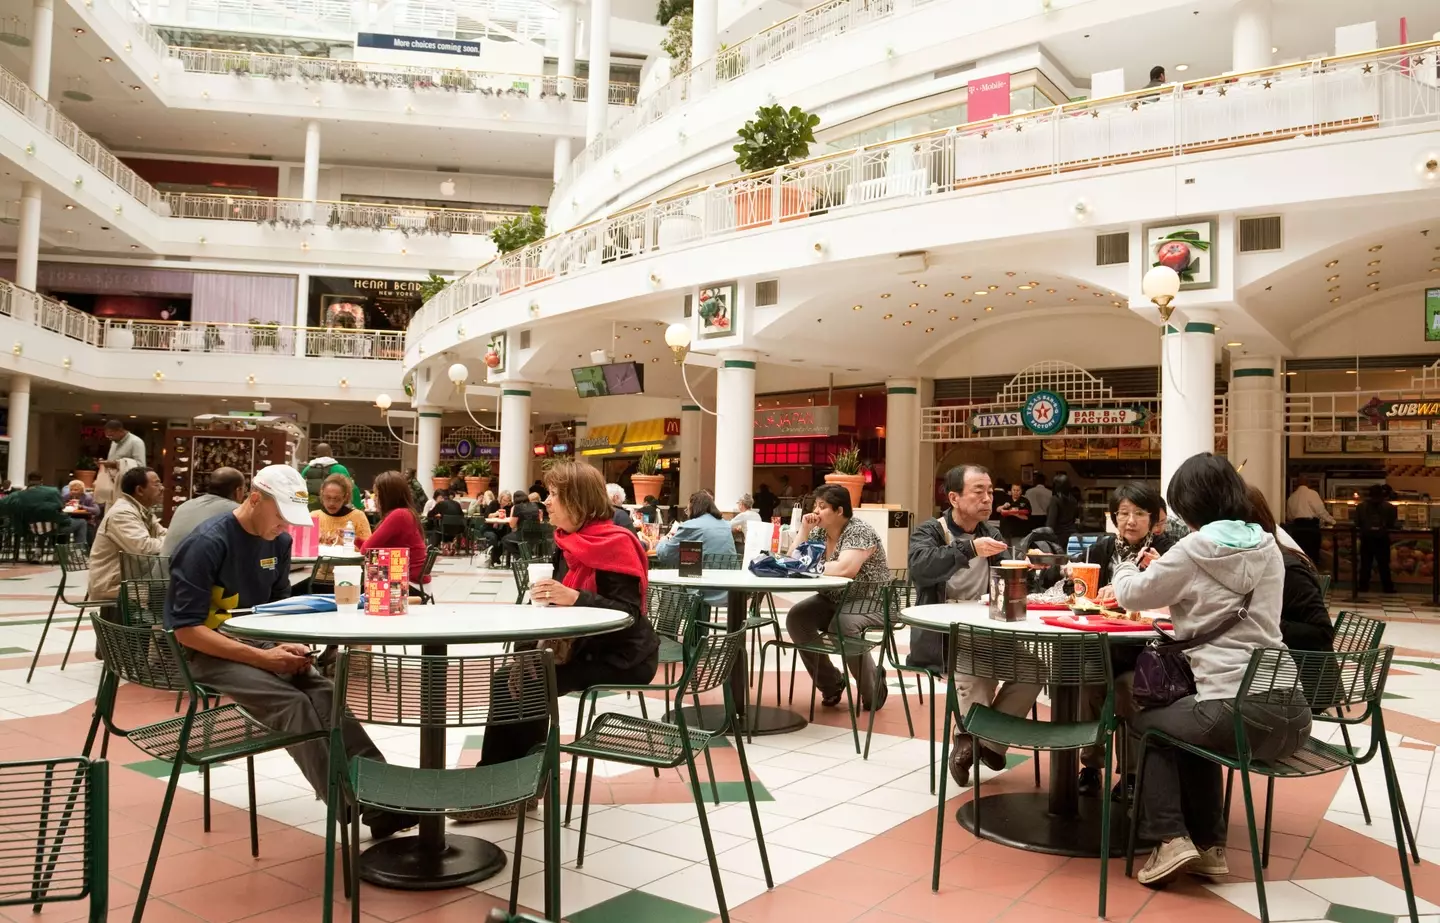 People who eat in food courts are expected to clean up their own rubbish.